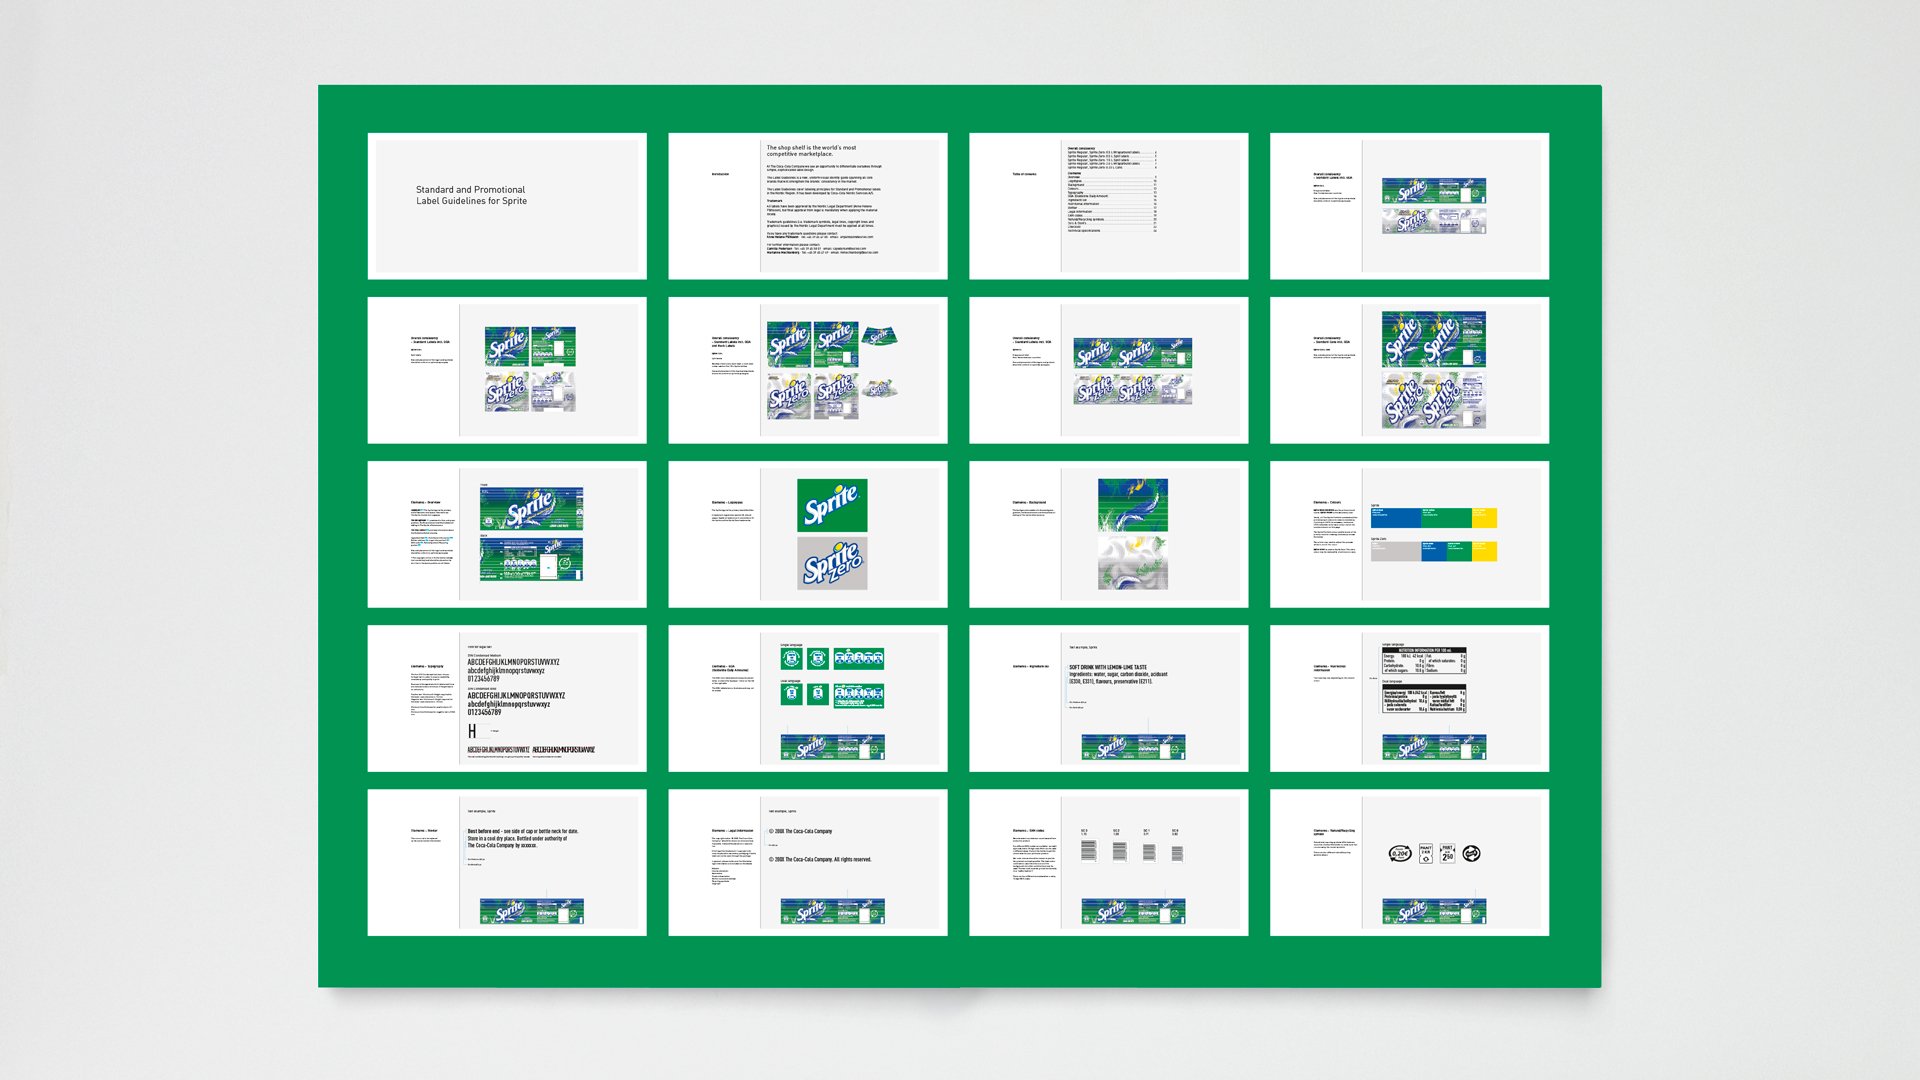 Sprite style guide overview by LOOP Associates